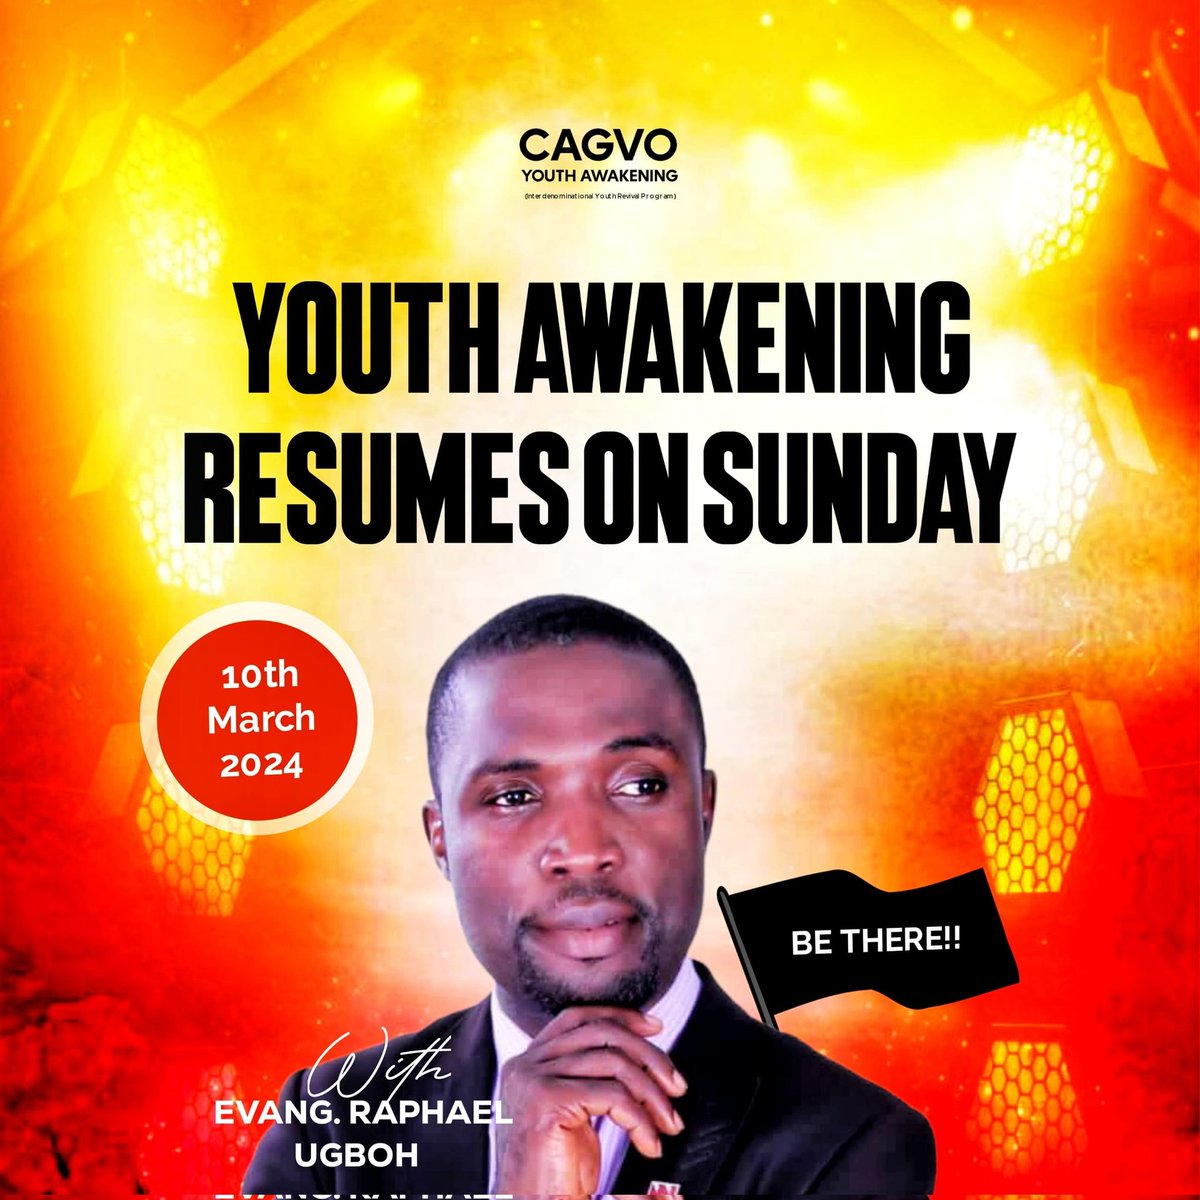 This evening, 4PM

Join us for Sunday Youth Awakening at:

Old CIMTECH or JAMB office along Shelter Pham Rd after Mountain of Fire Ministries, Byazhin, Off Arab Road, Kubwa, Abuja.

See you this evening. 

#youthawakening 
#kubwa 
#TheAwakening